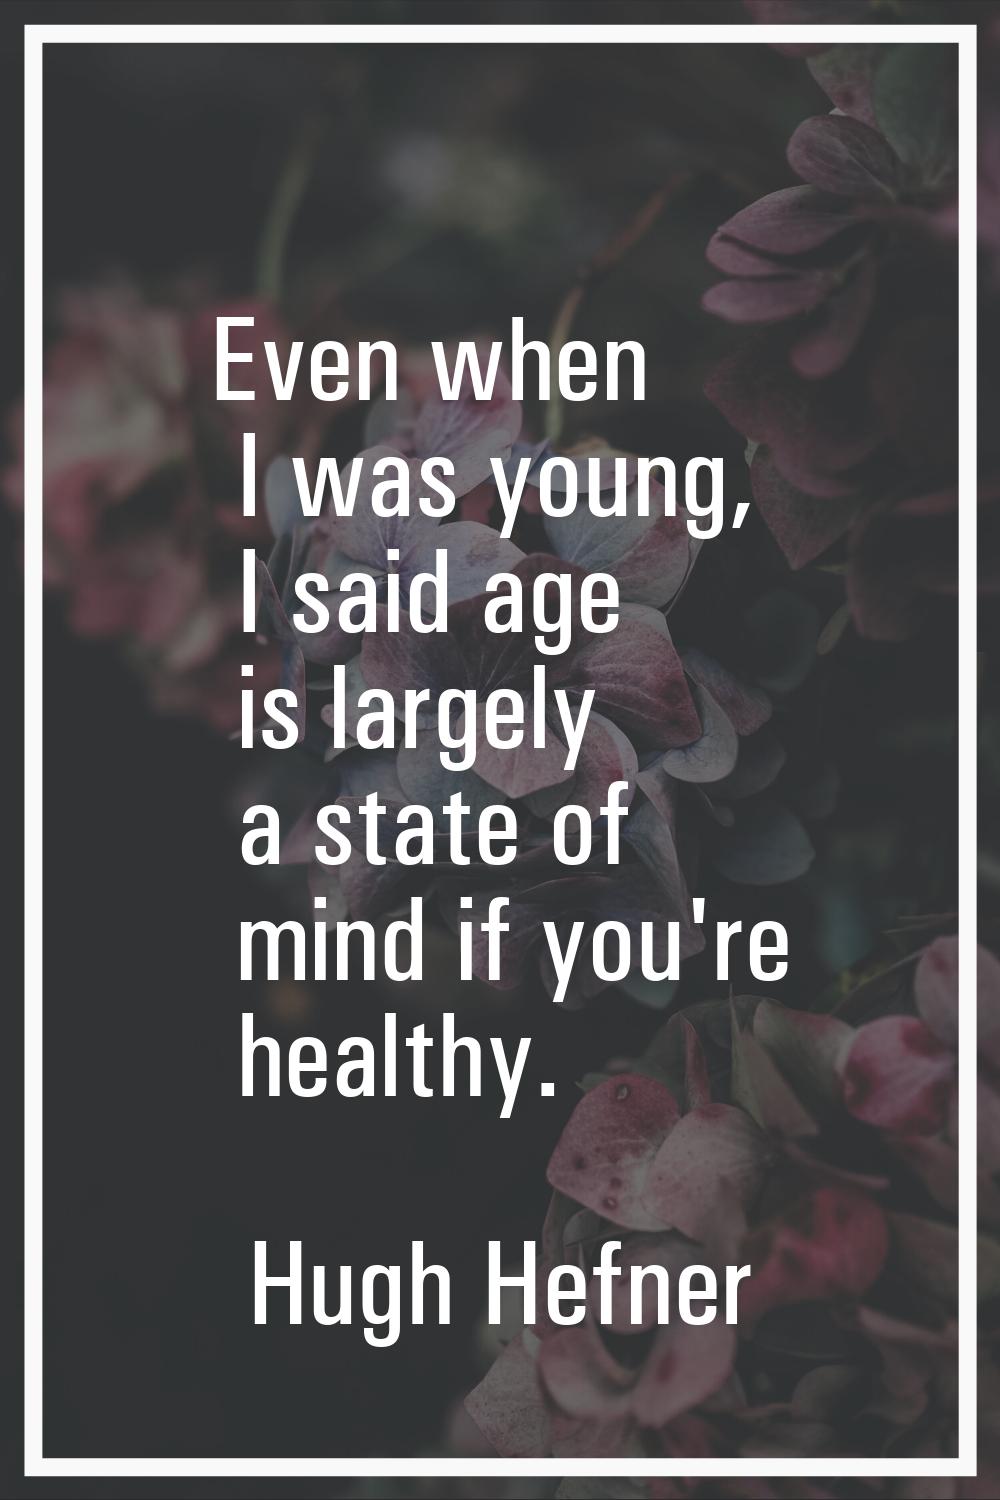 Even when I was young, I said age is largely a state of mind if you're healthy.